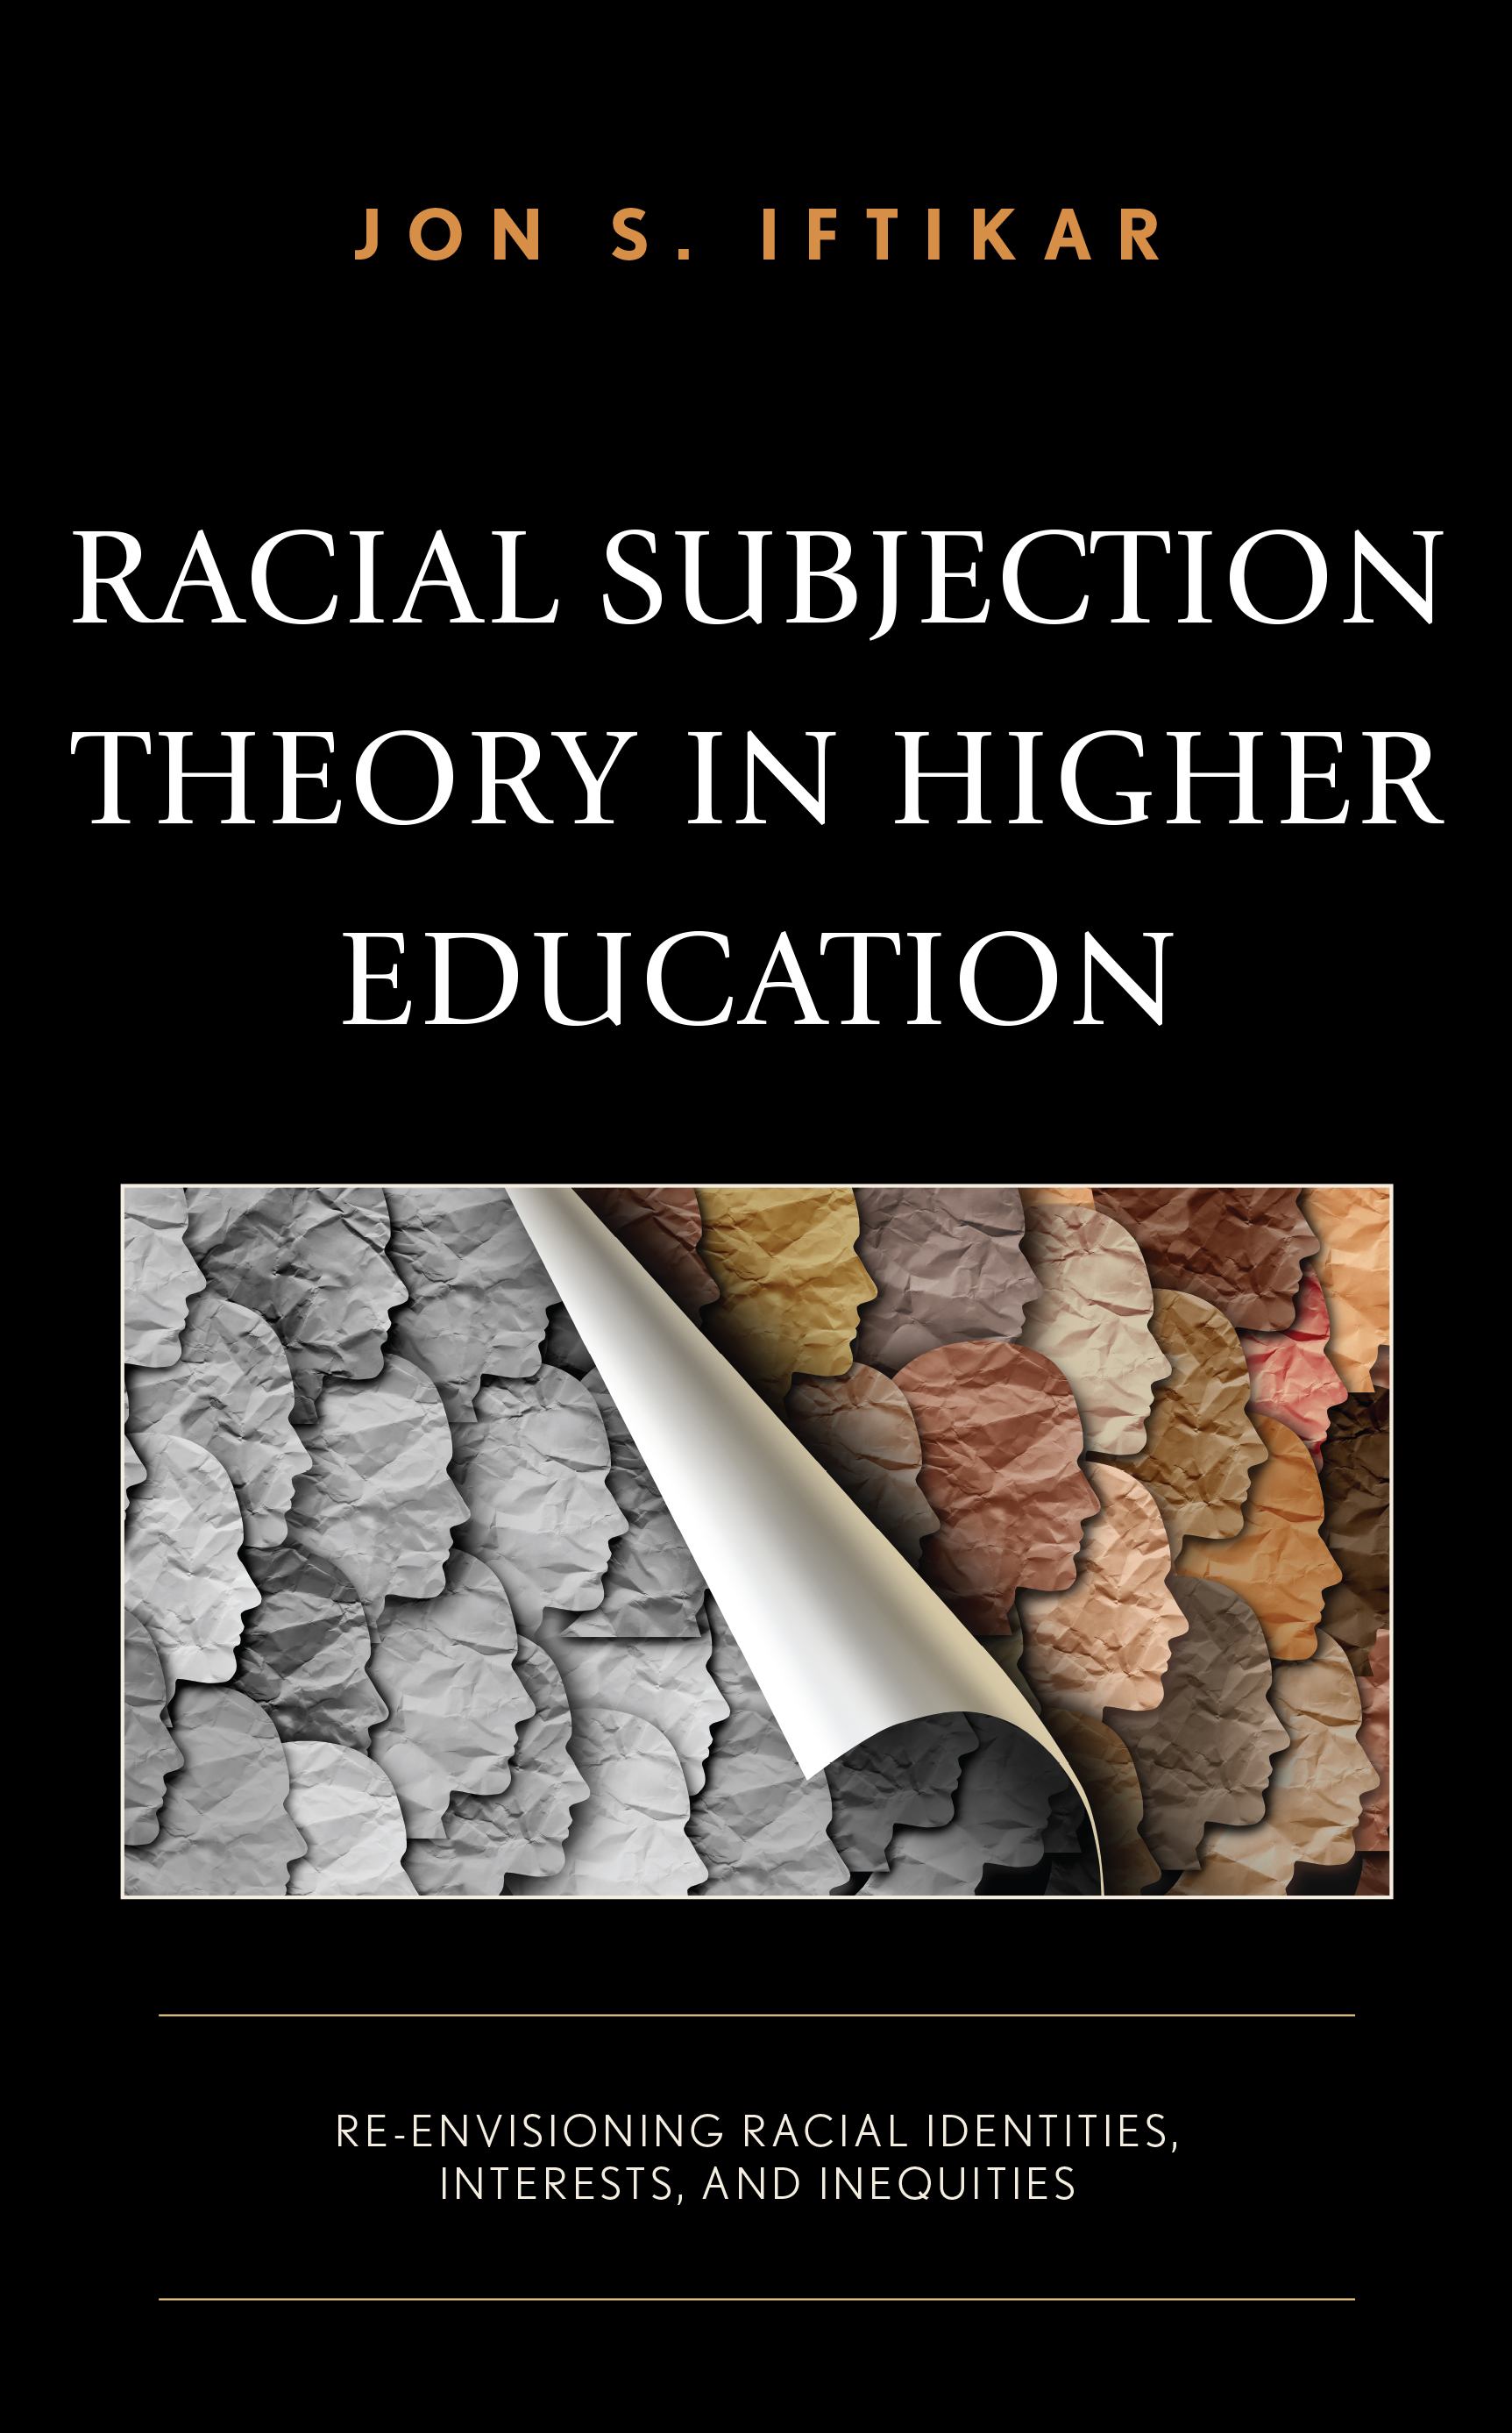 Racial Subjection Theory in Higher Education: Re-envisioning Racial Identities, Interests, and Inequities